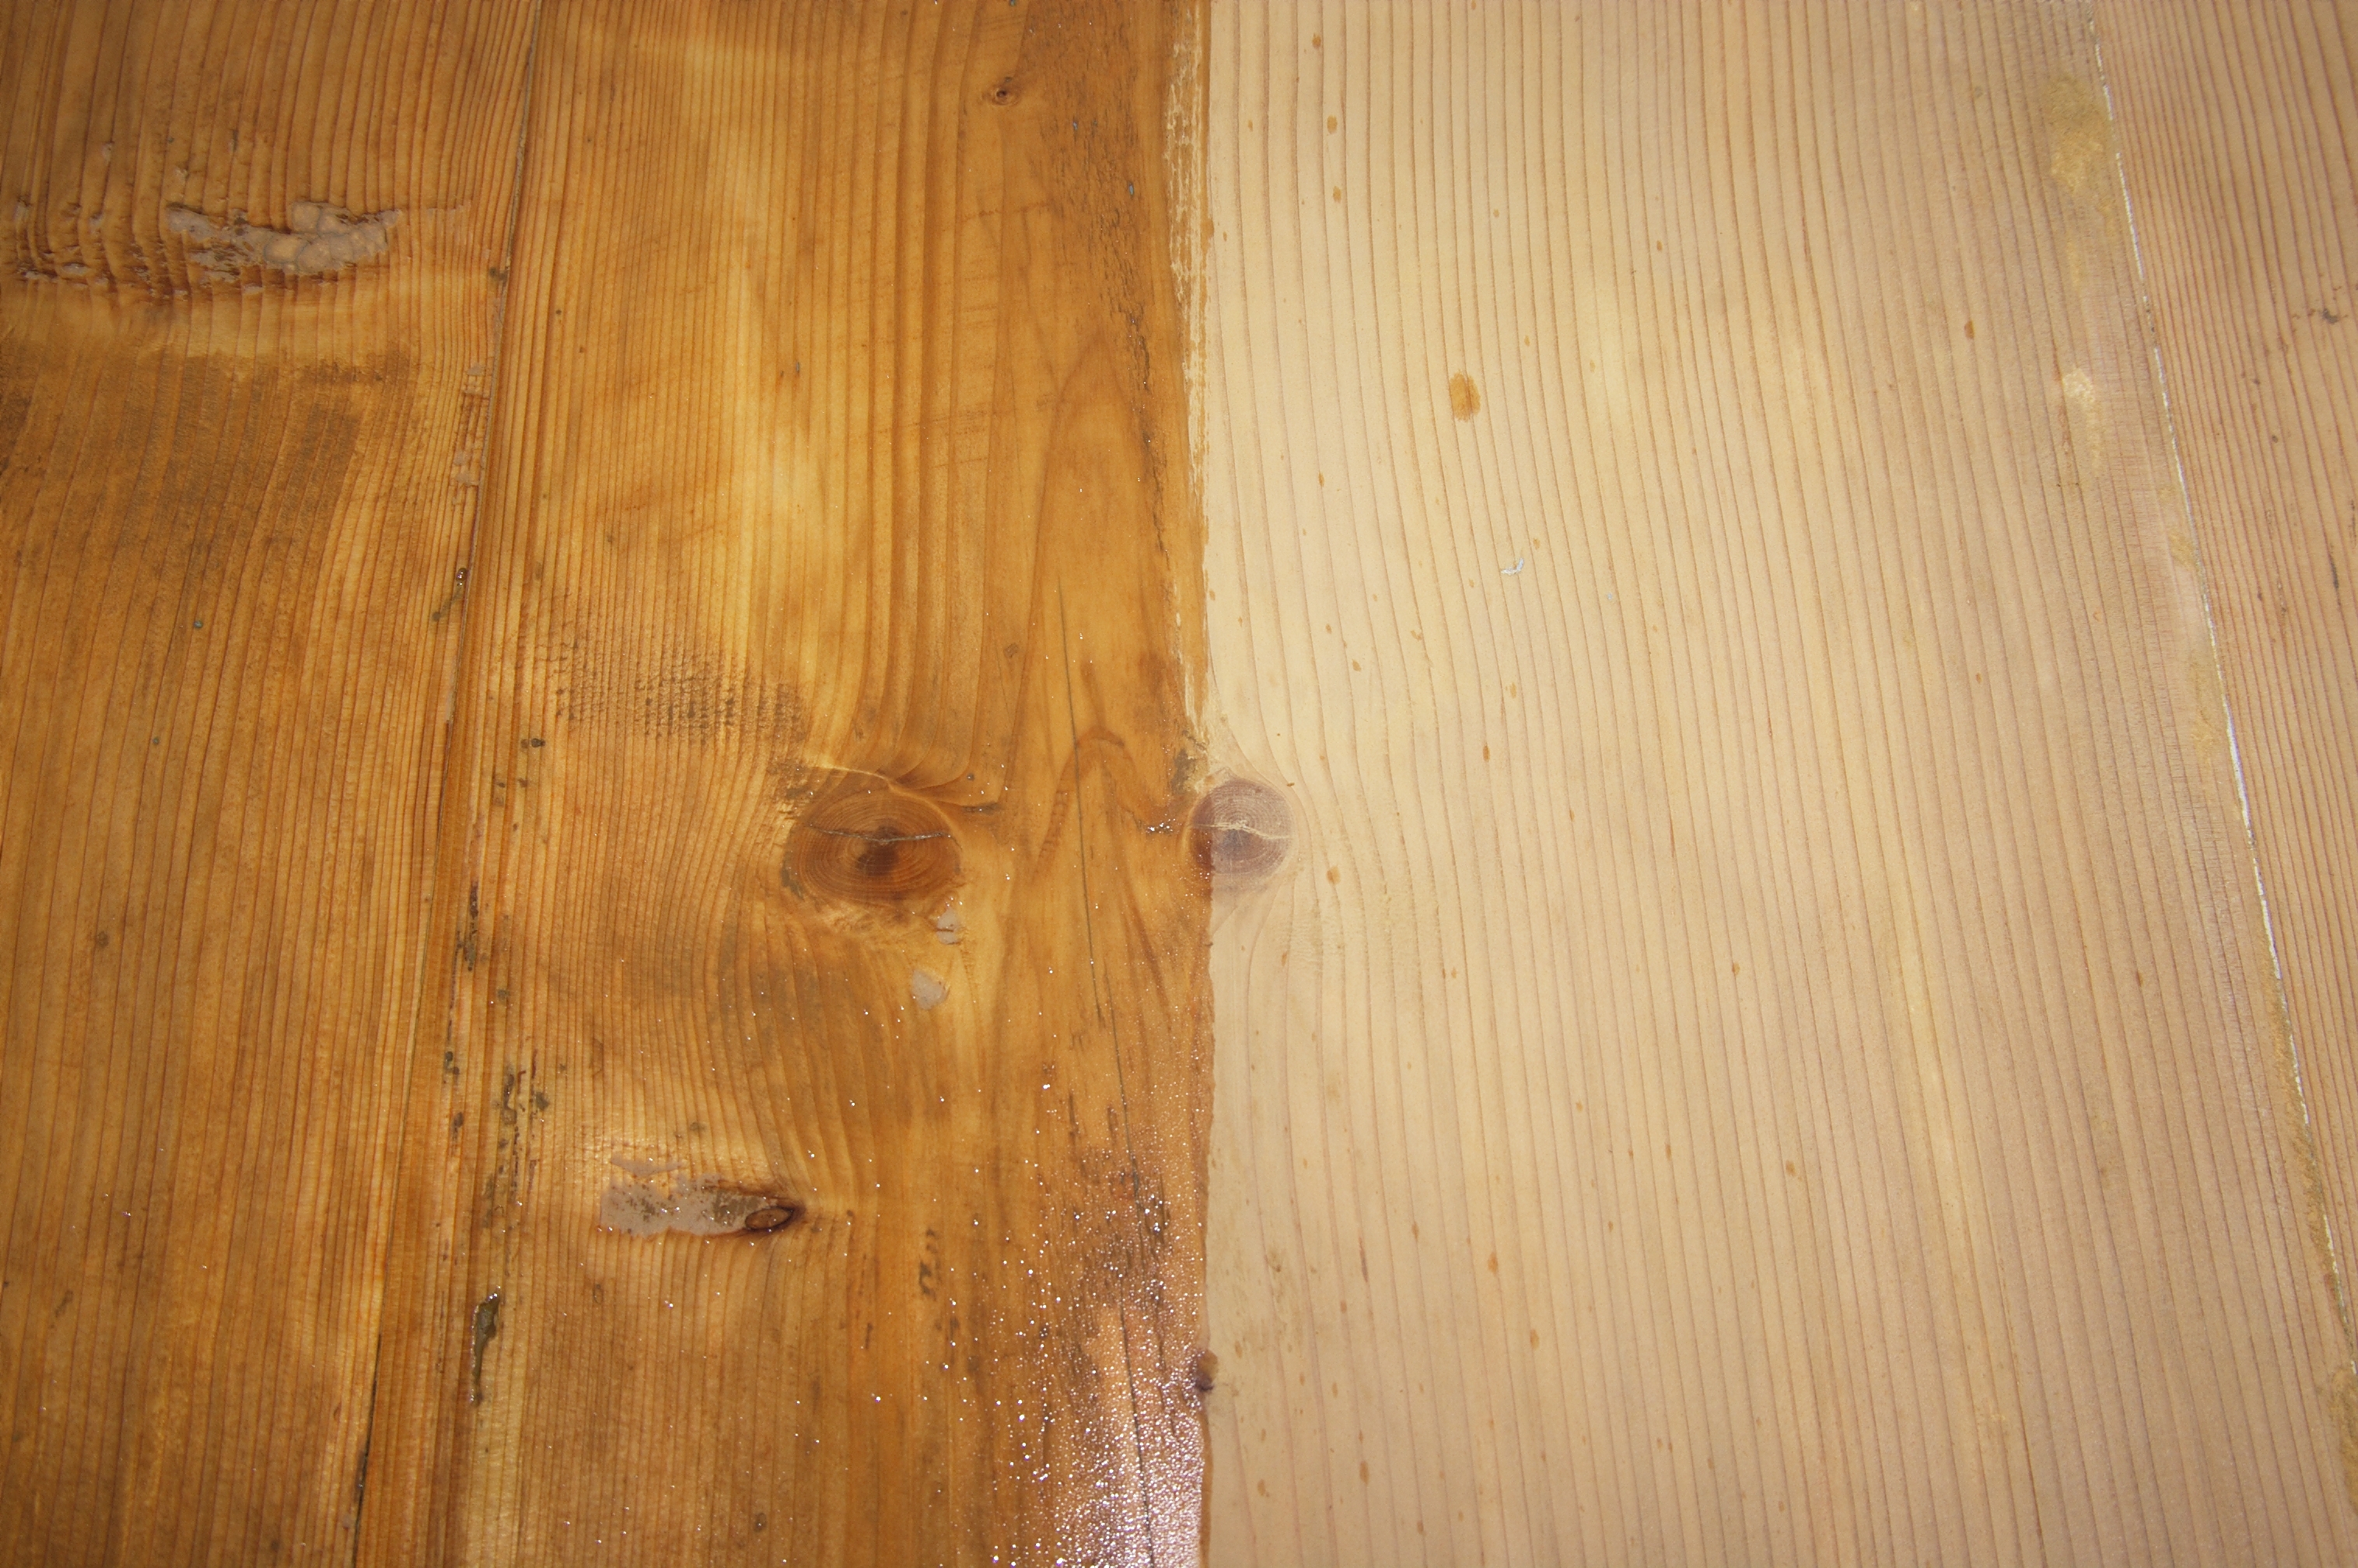 Linseed oil, a natural solution for Wood Finishing - Ardec